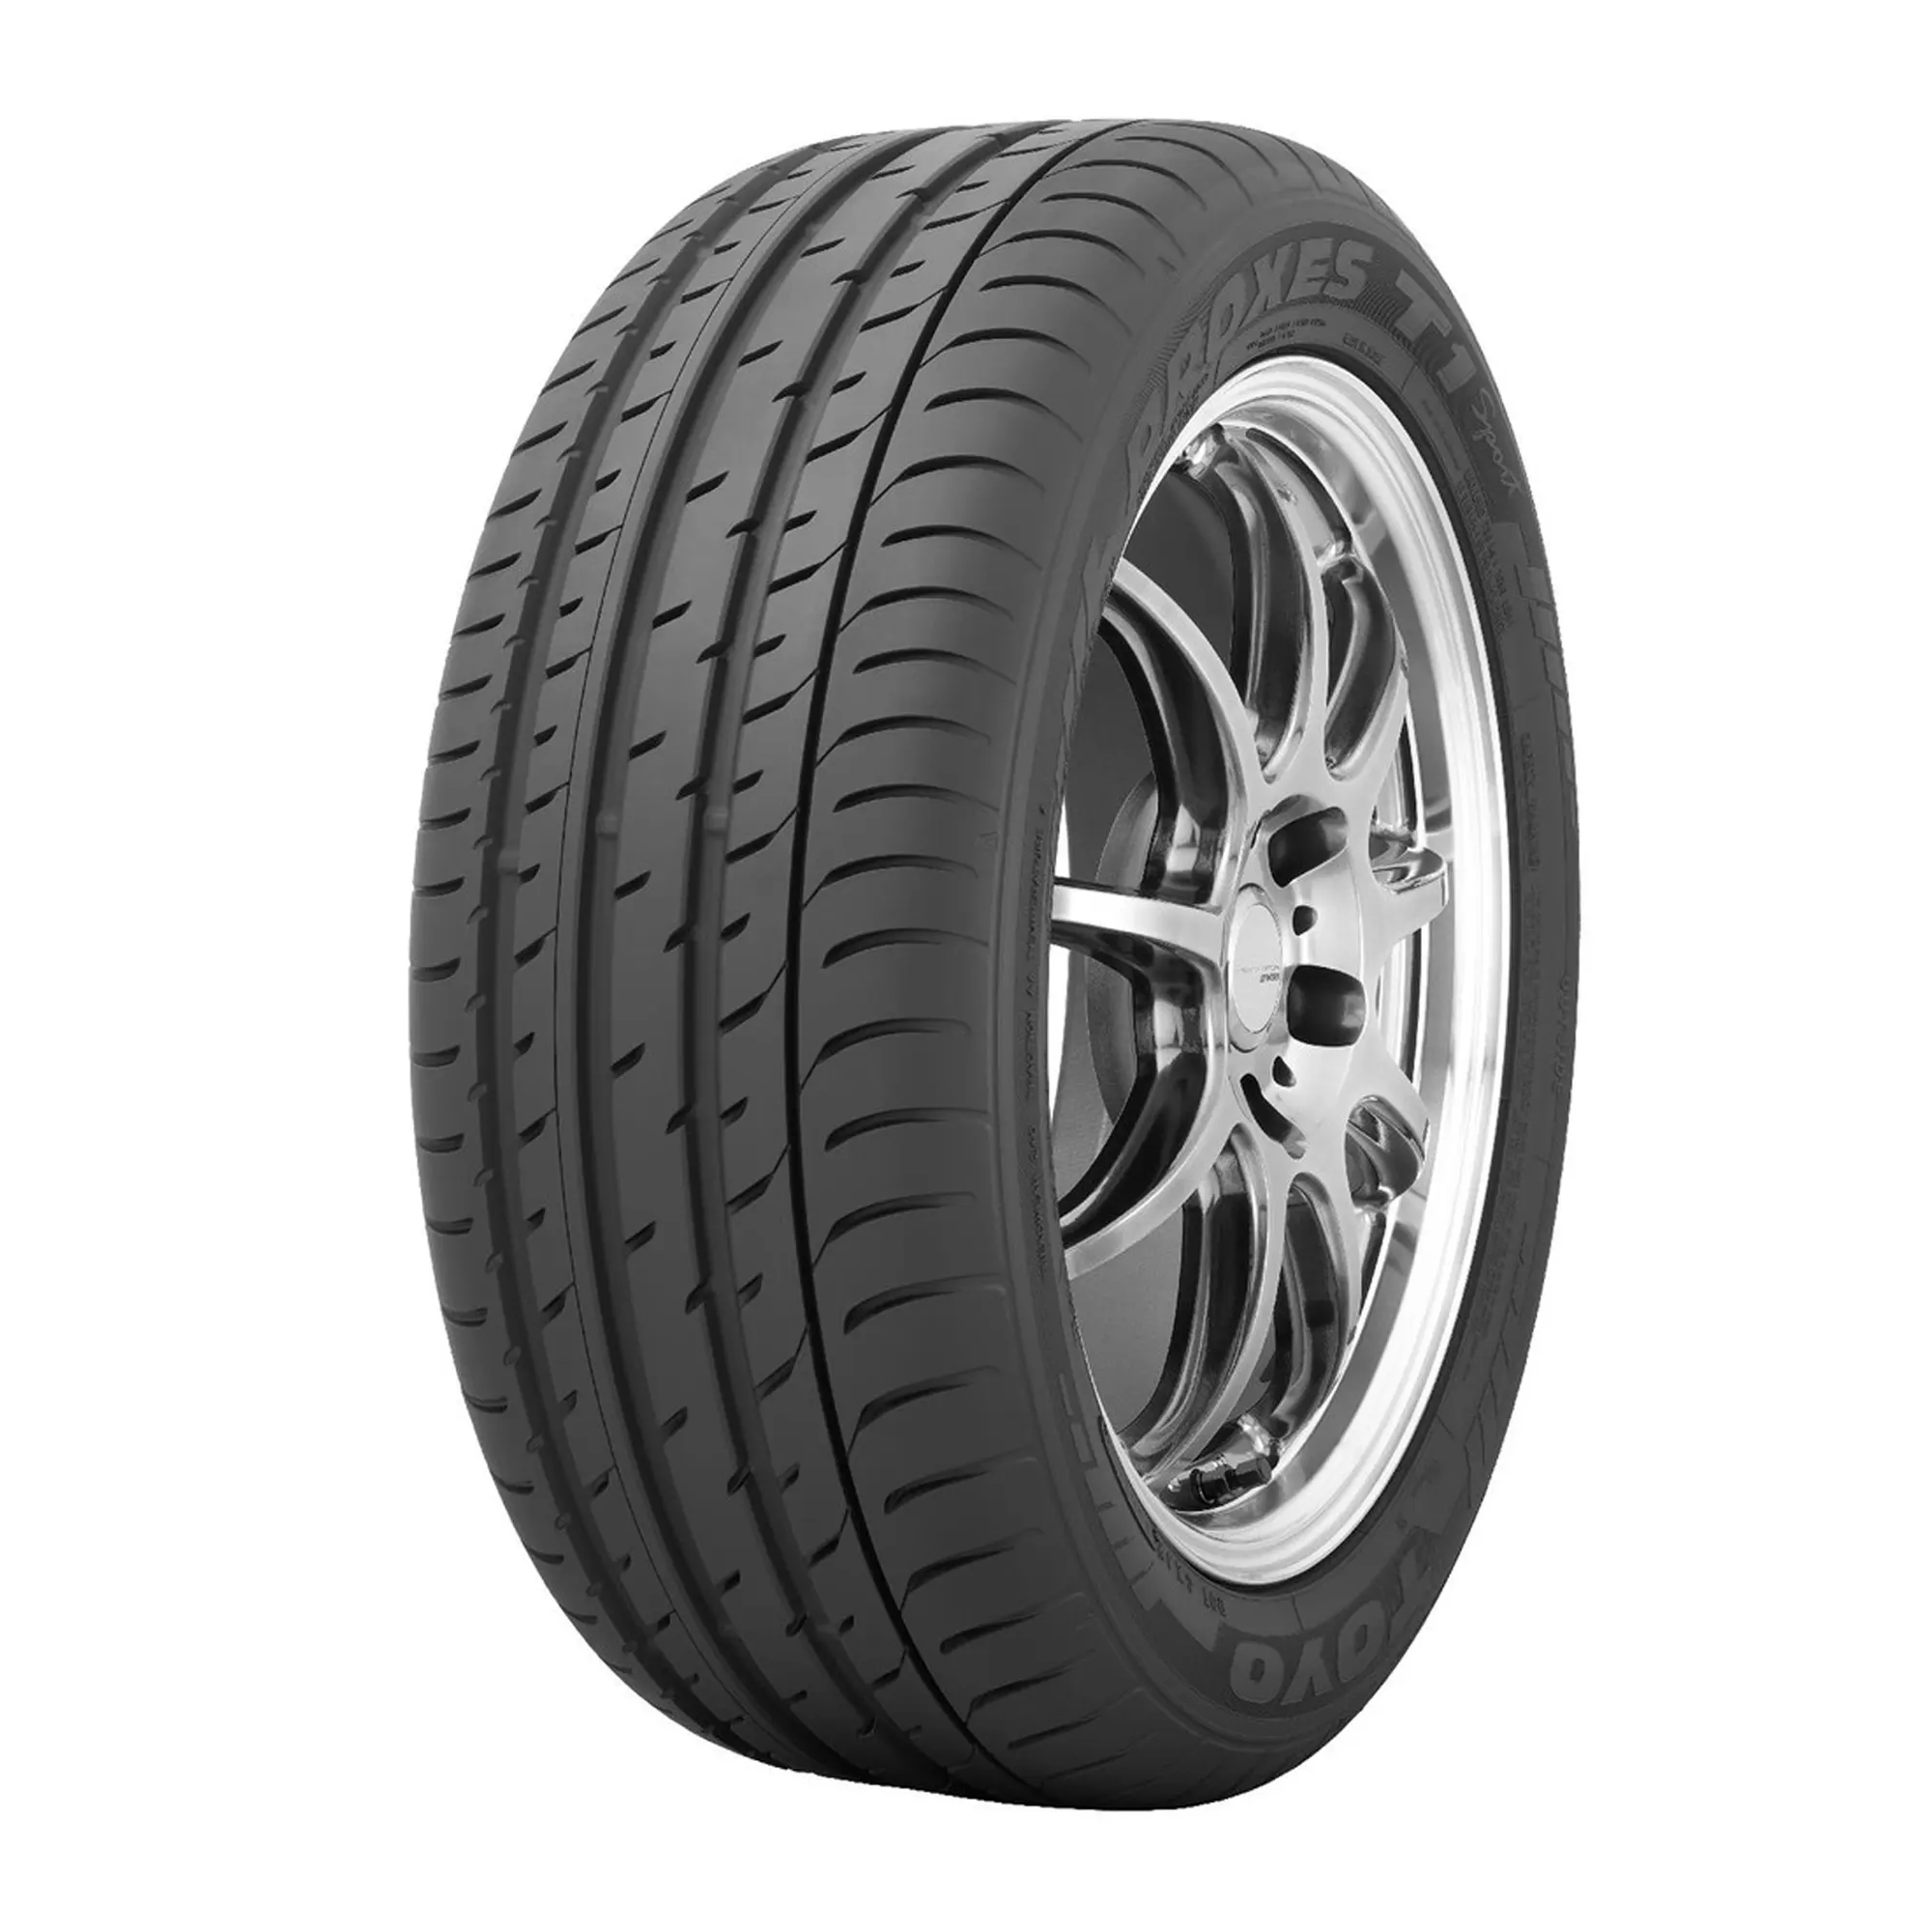 Шина 255/60R18 108Y Proxes T1 Sport SUV AO